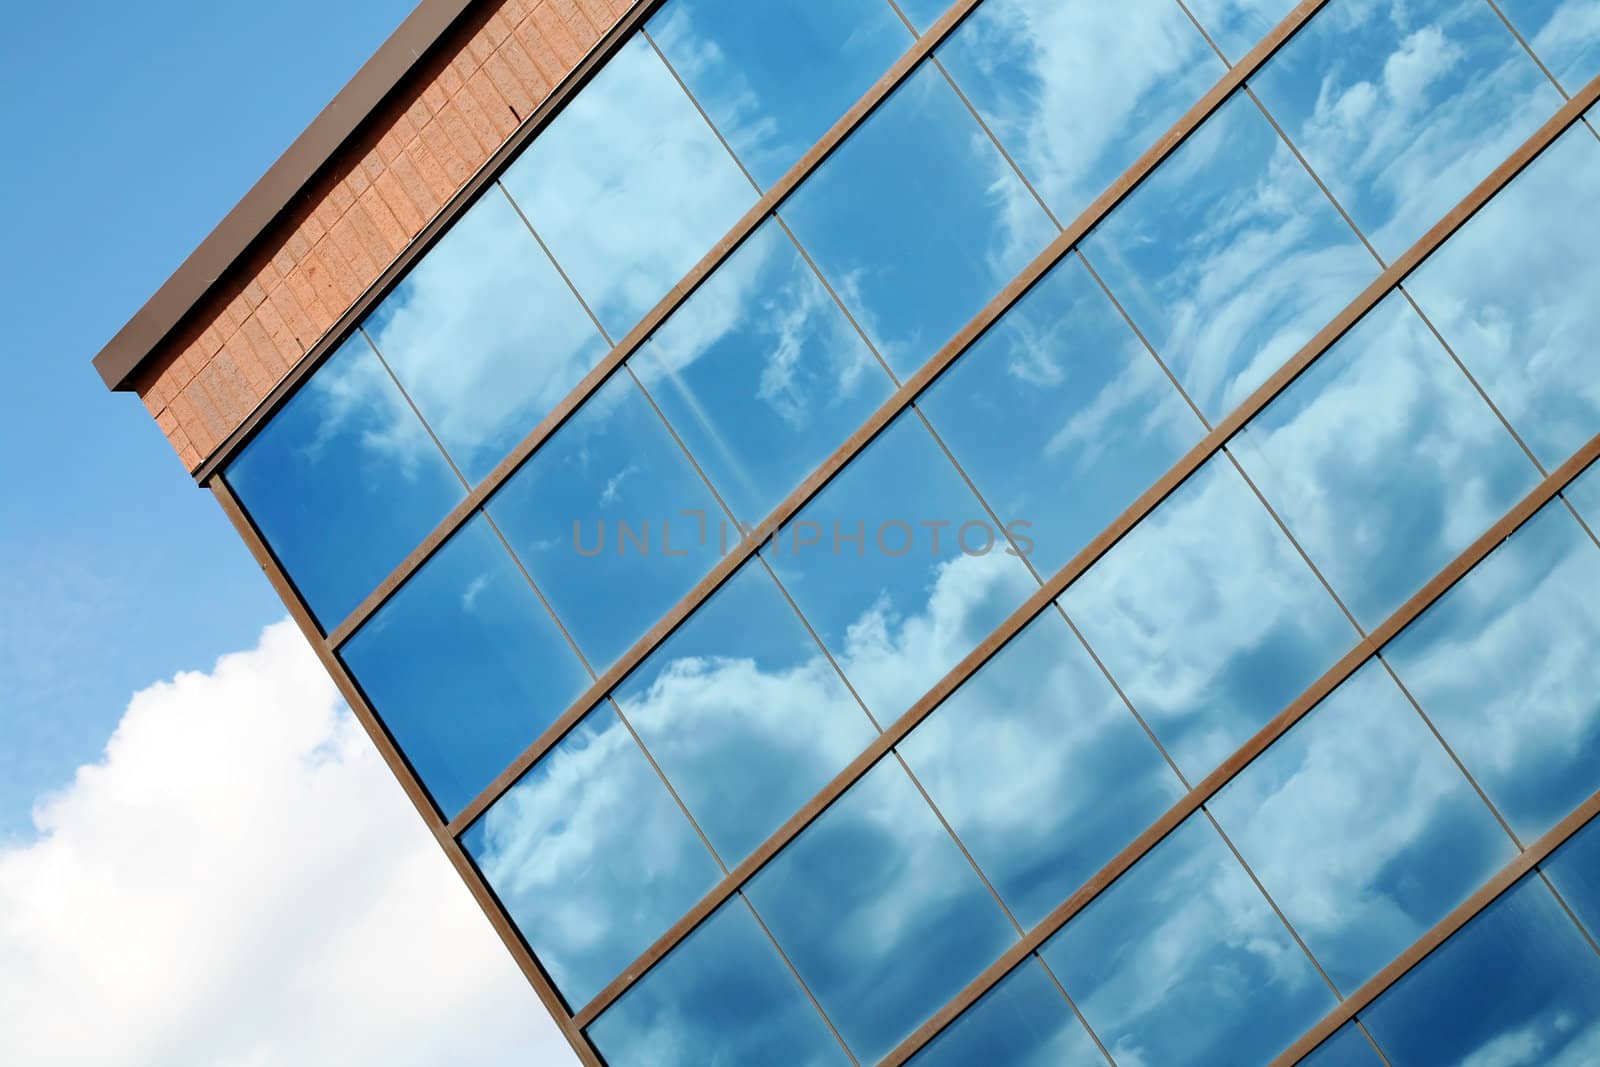 Beautiful clouds reflected in glass windows